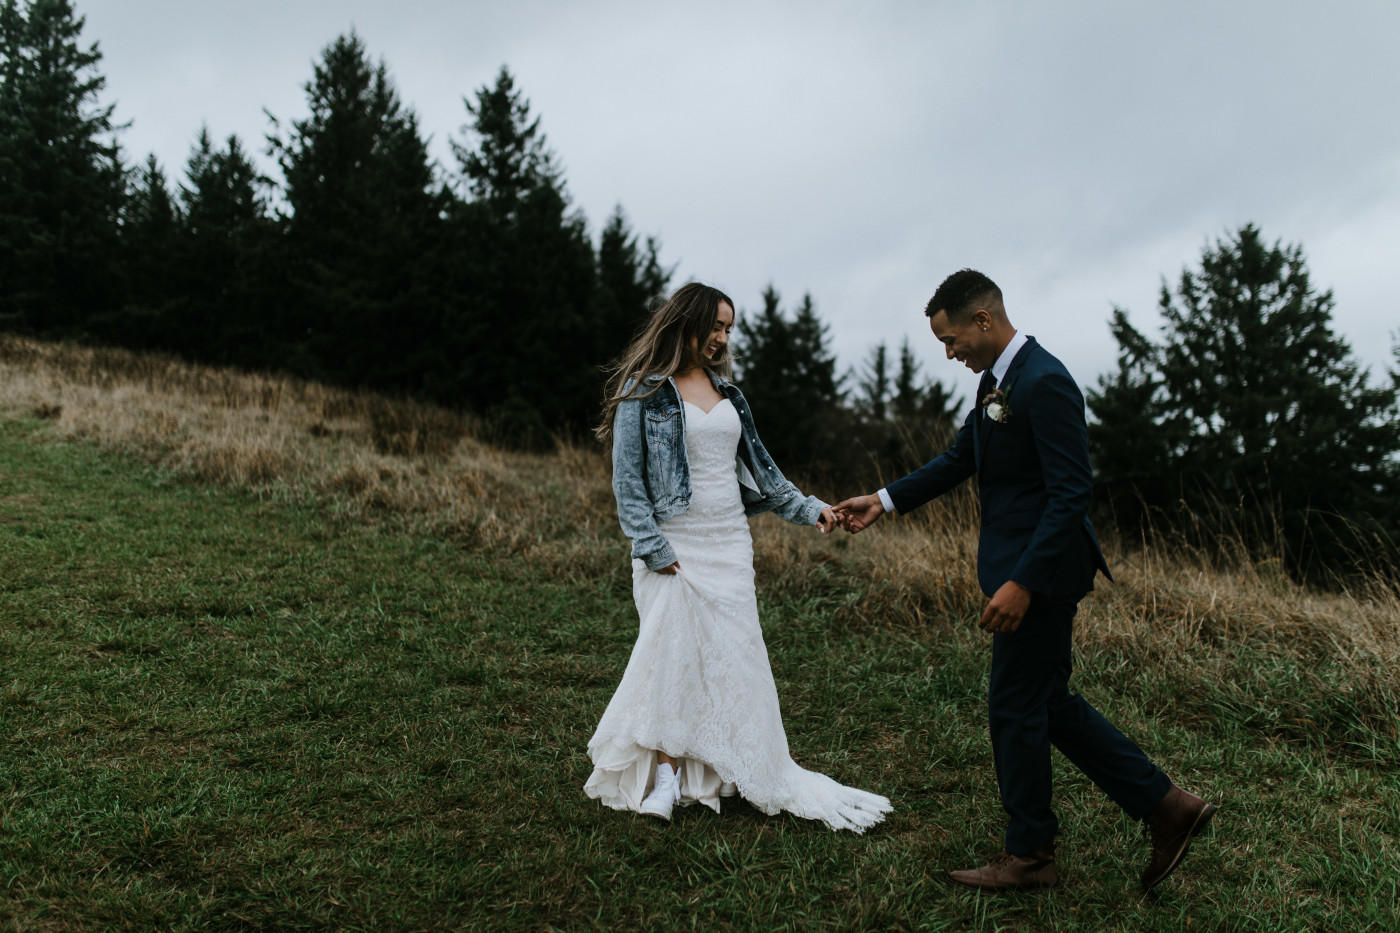 Deandre admires Ariana. Elopement photography at Mount Hood by Sienna Plus Josh.